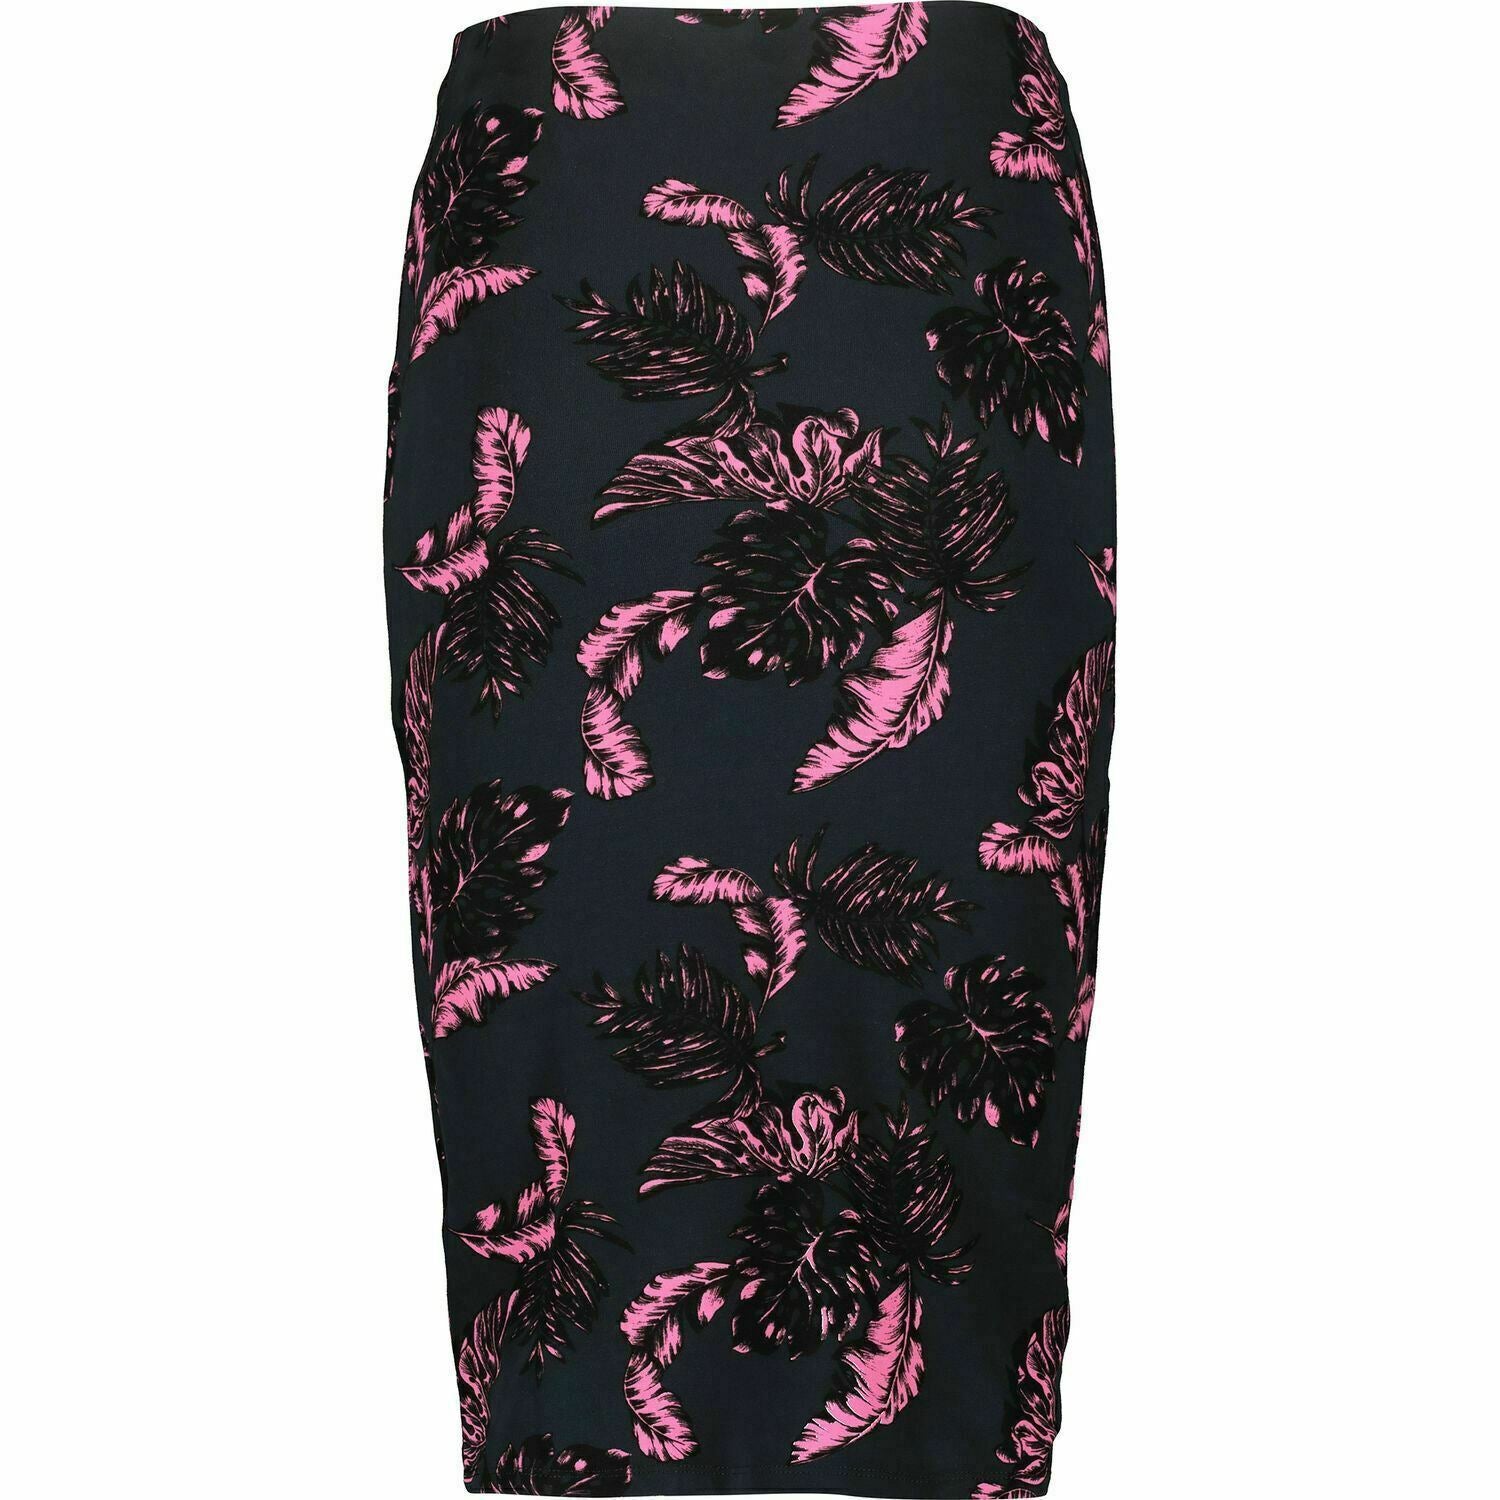 SUPERDRY Women's Beach Leaf Pencil Skirt, Tropical Navy / Pink, size XS - UK 8